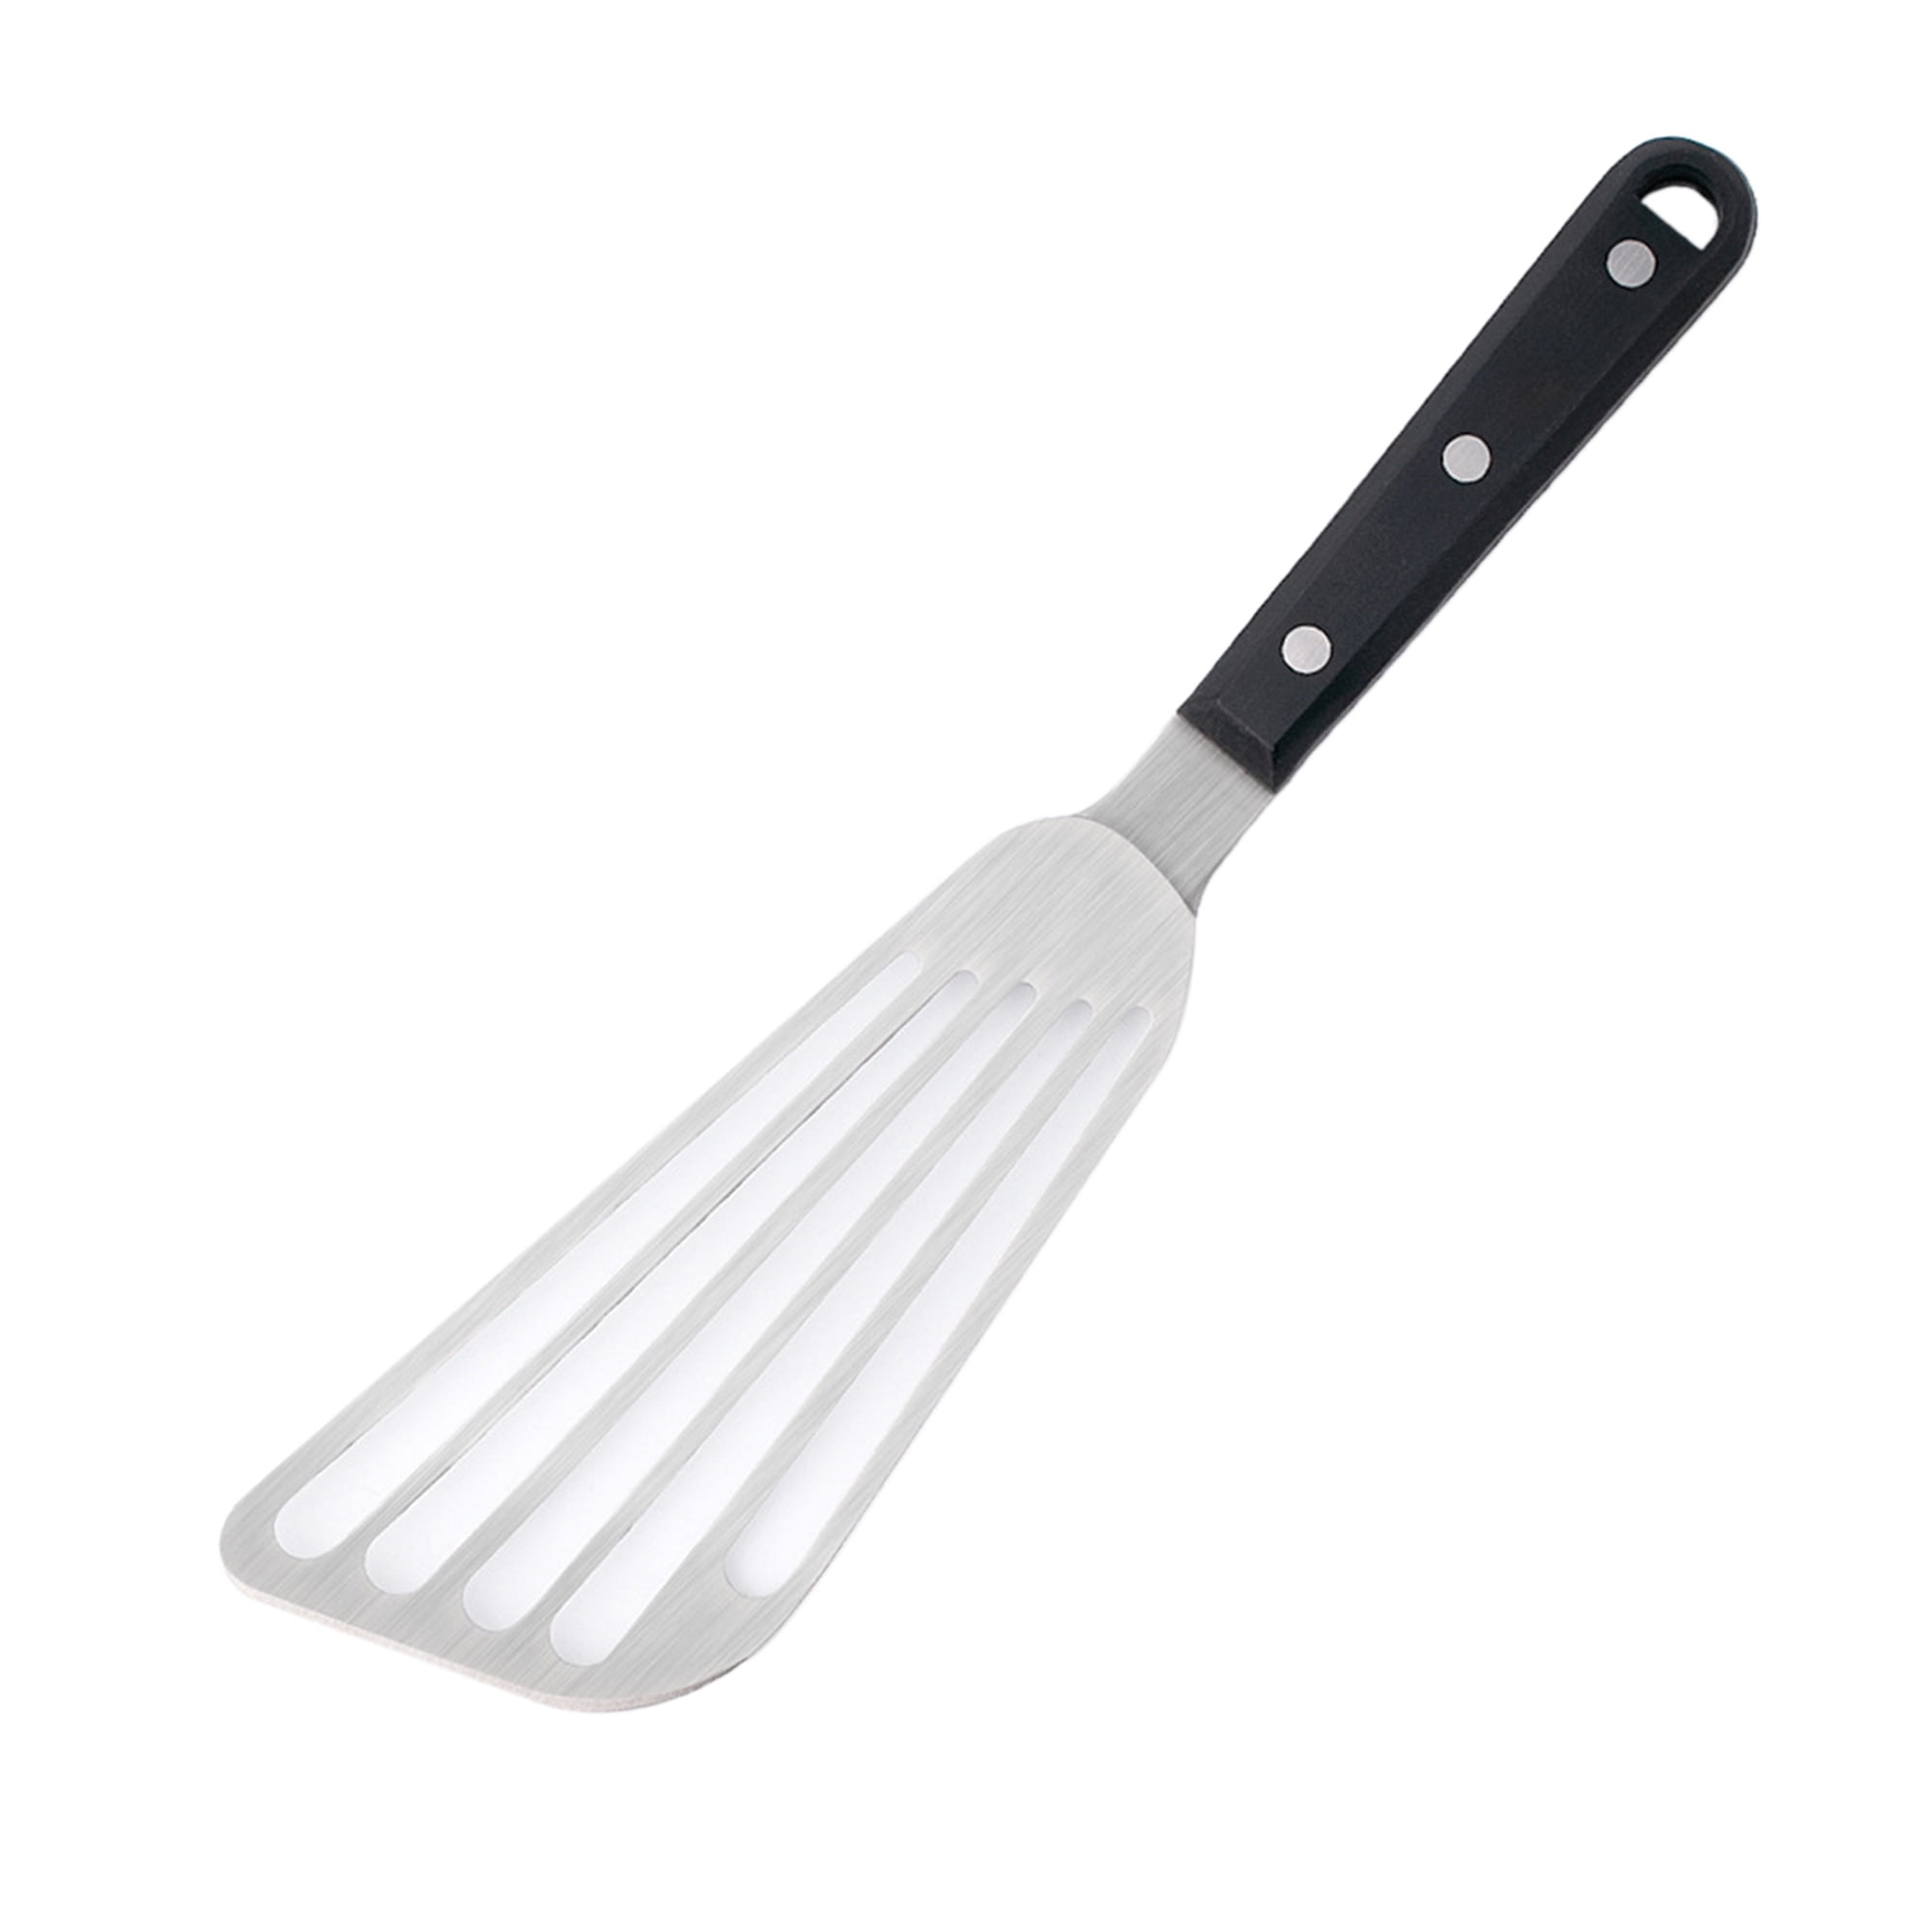 Luxsea Stainless Steel Flipper Fish Shovel,Kitchen Fish Turner Spatula Perfect for Flipping and Turning Tools 